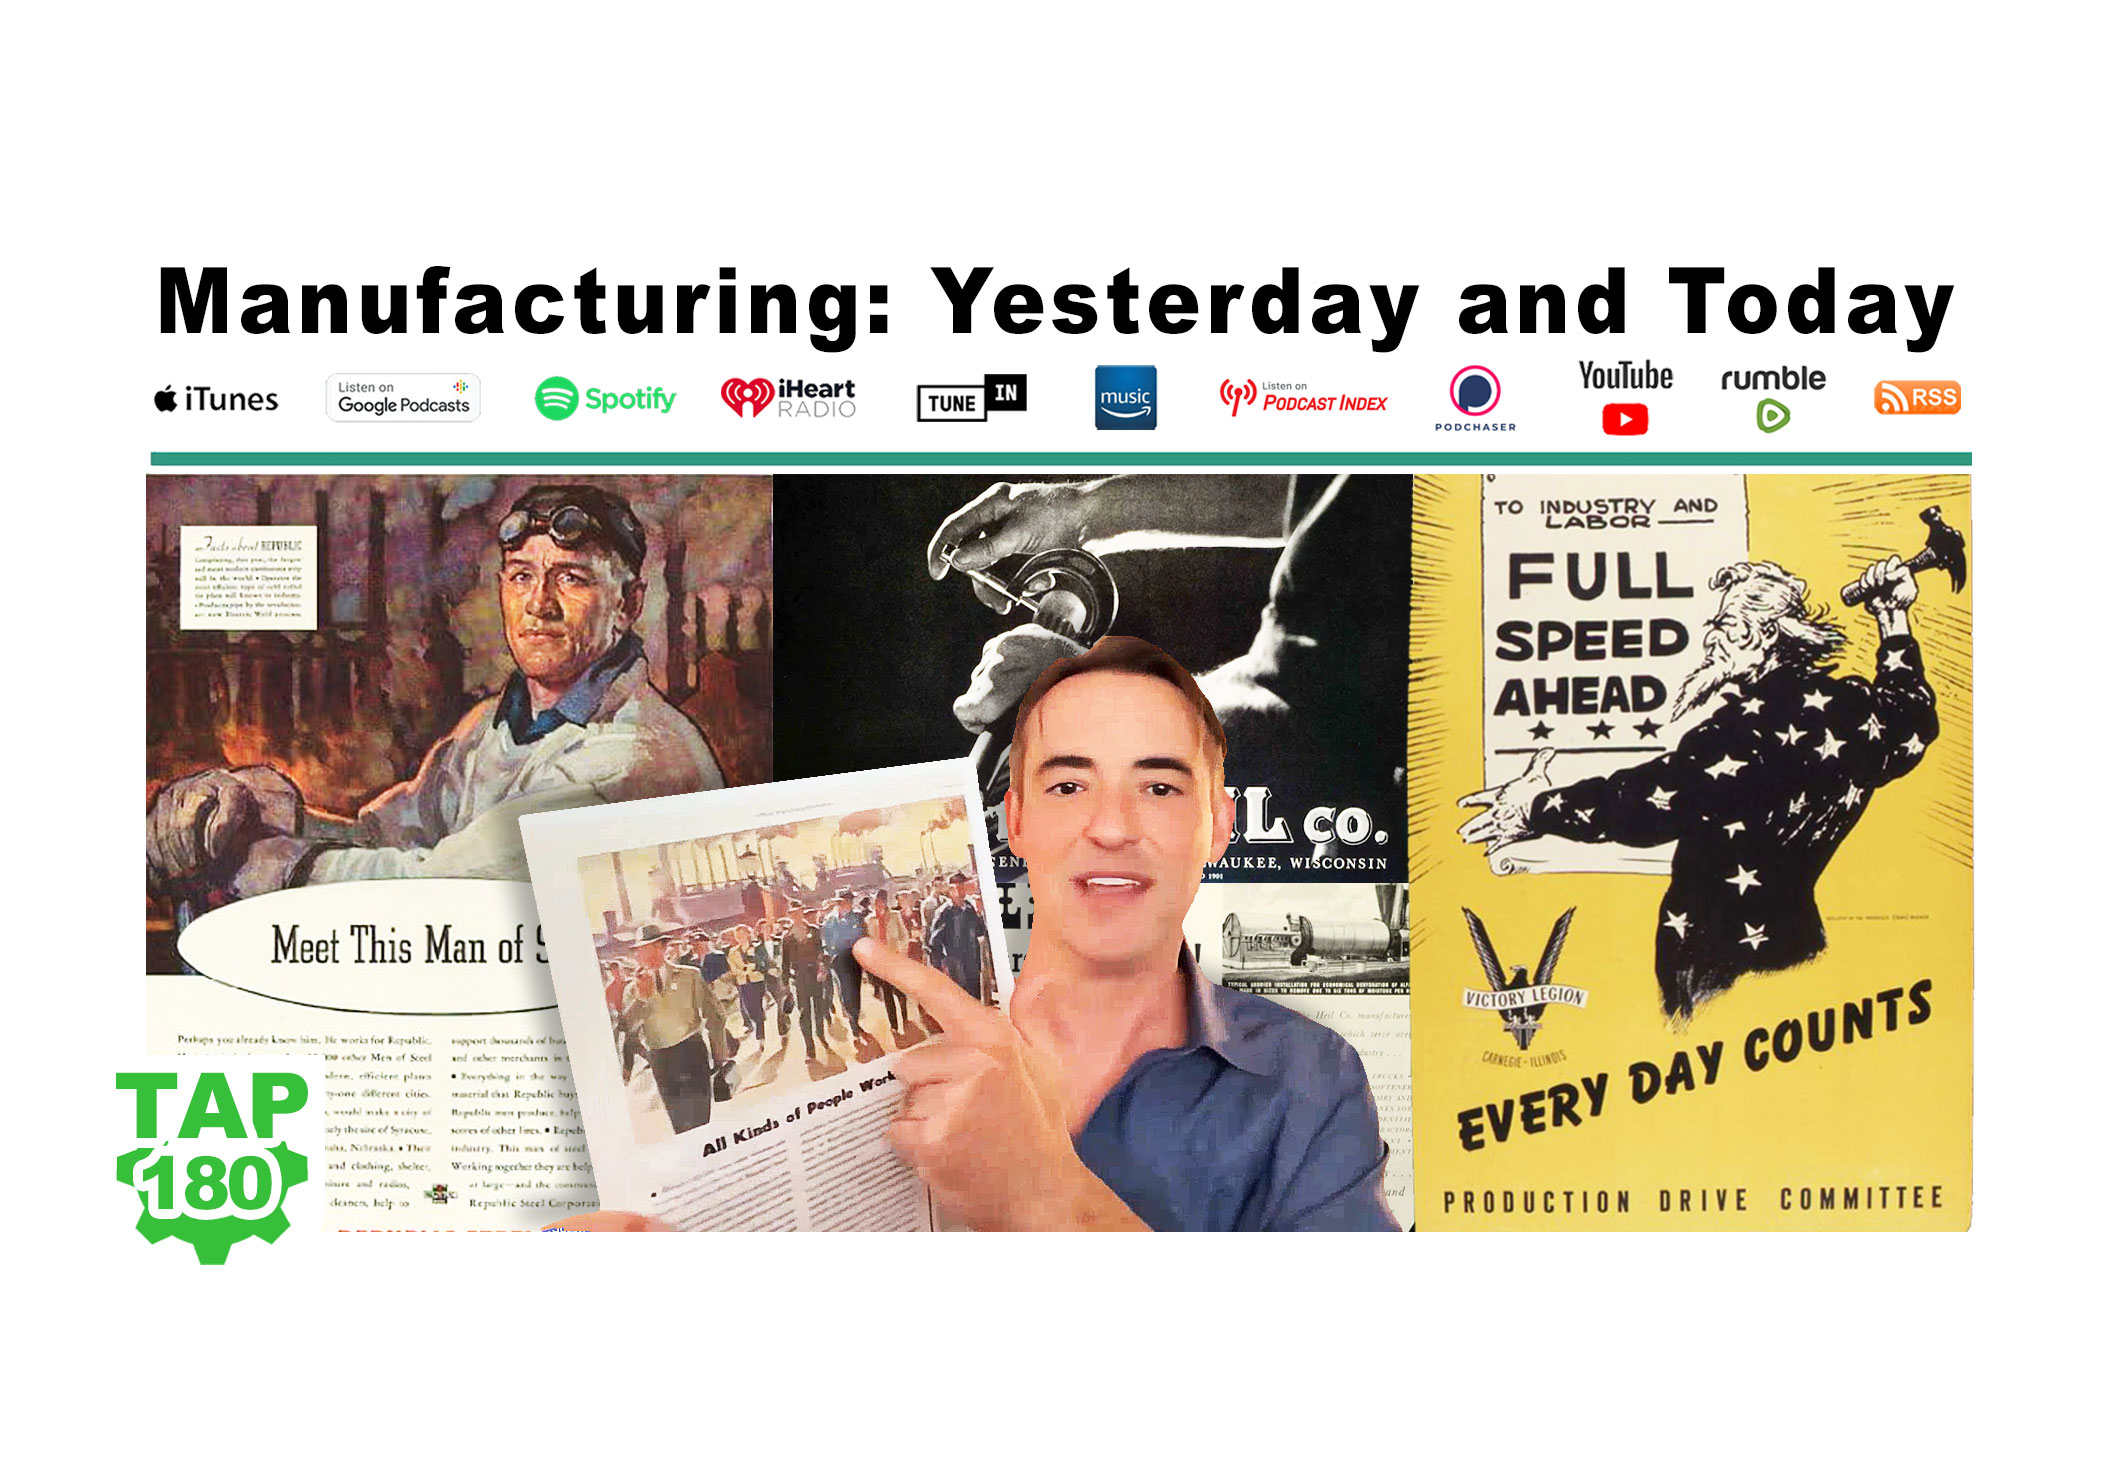 Manufacturing: Yesterday and Today (P180)